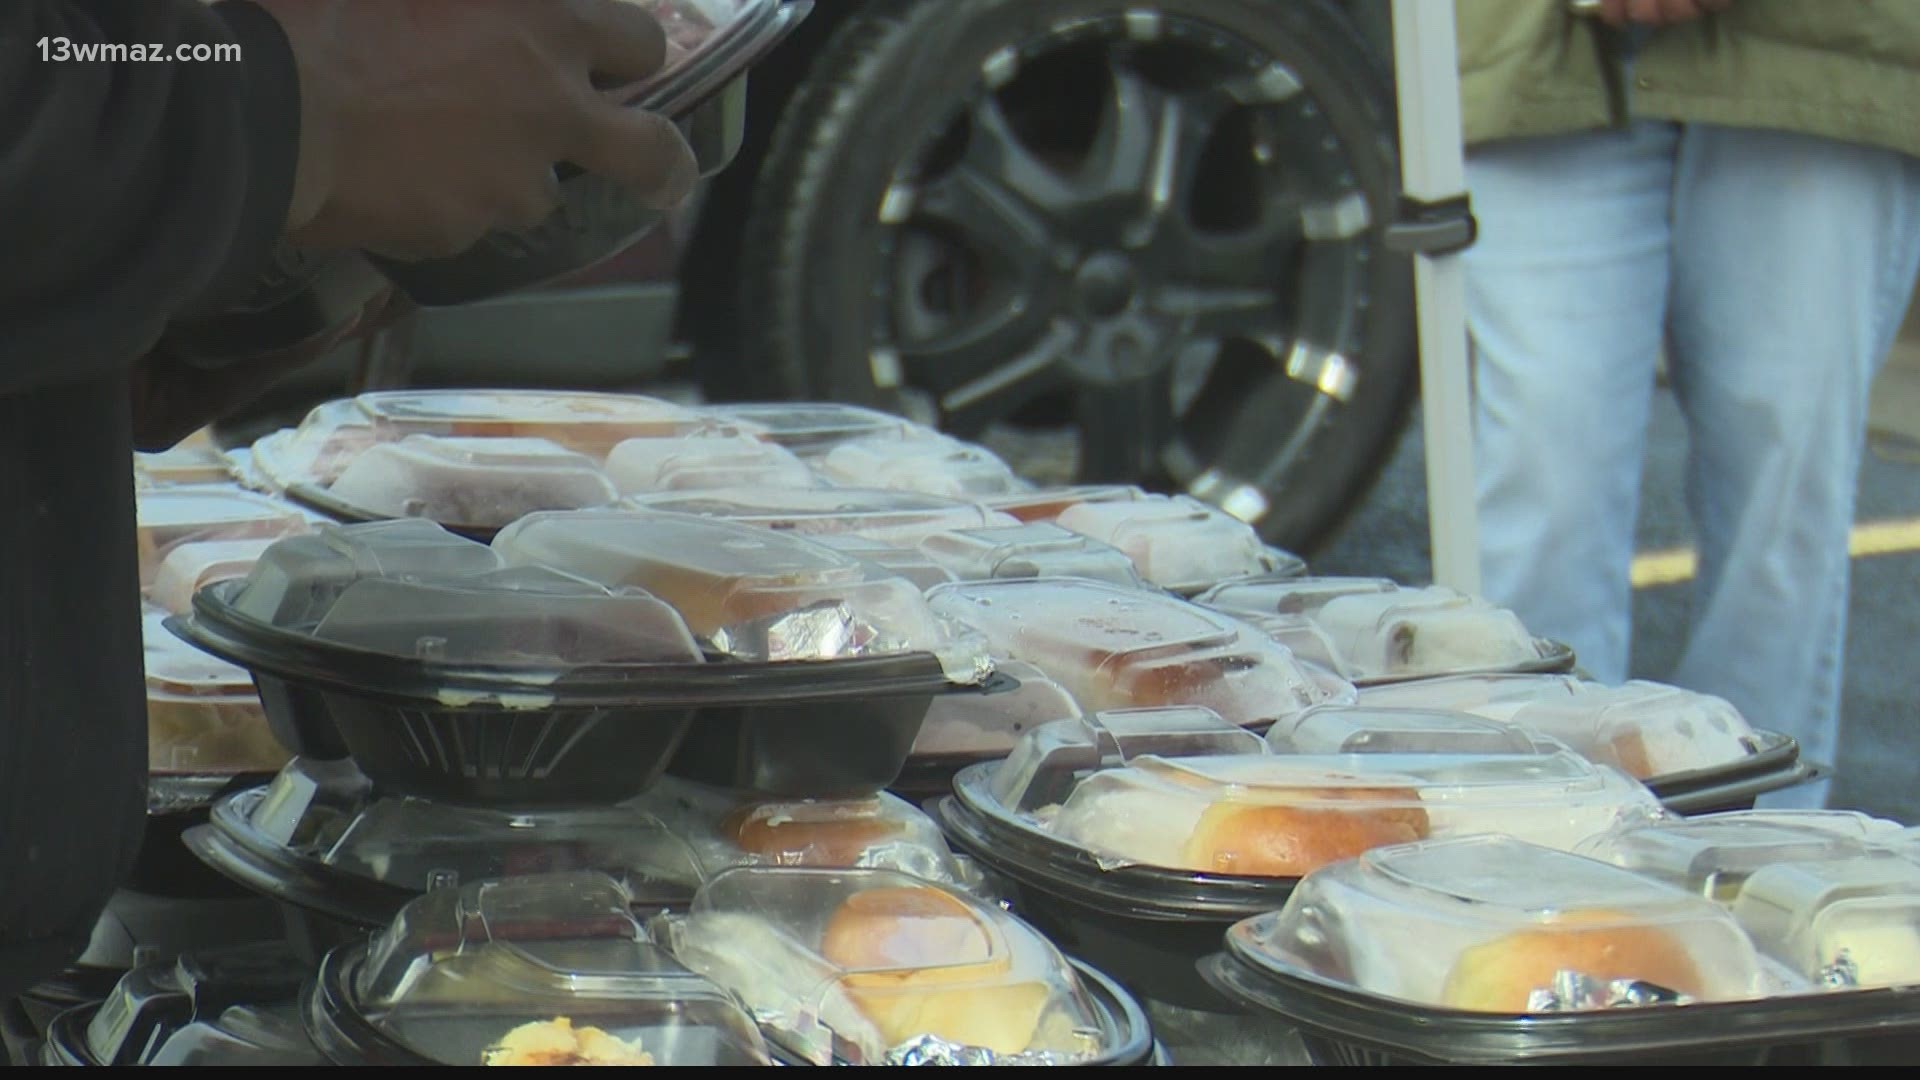 A Macon law firm spent their Thanksgiving morning handing out hot meals to those in need.